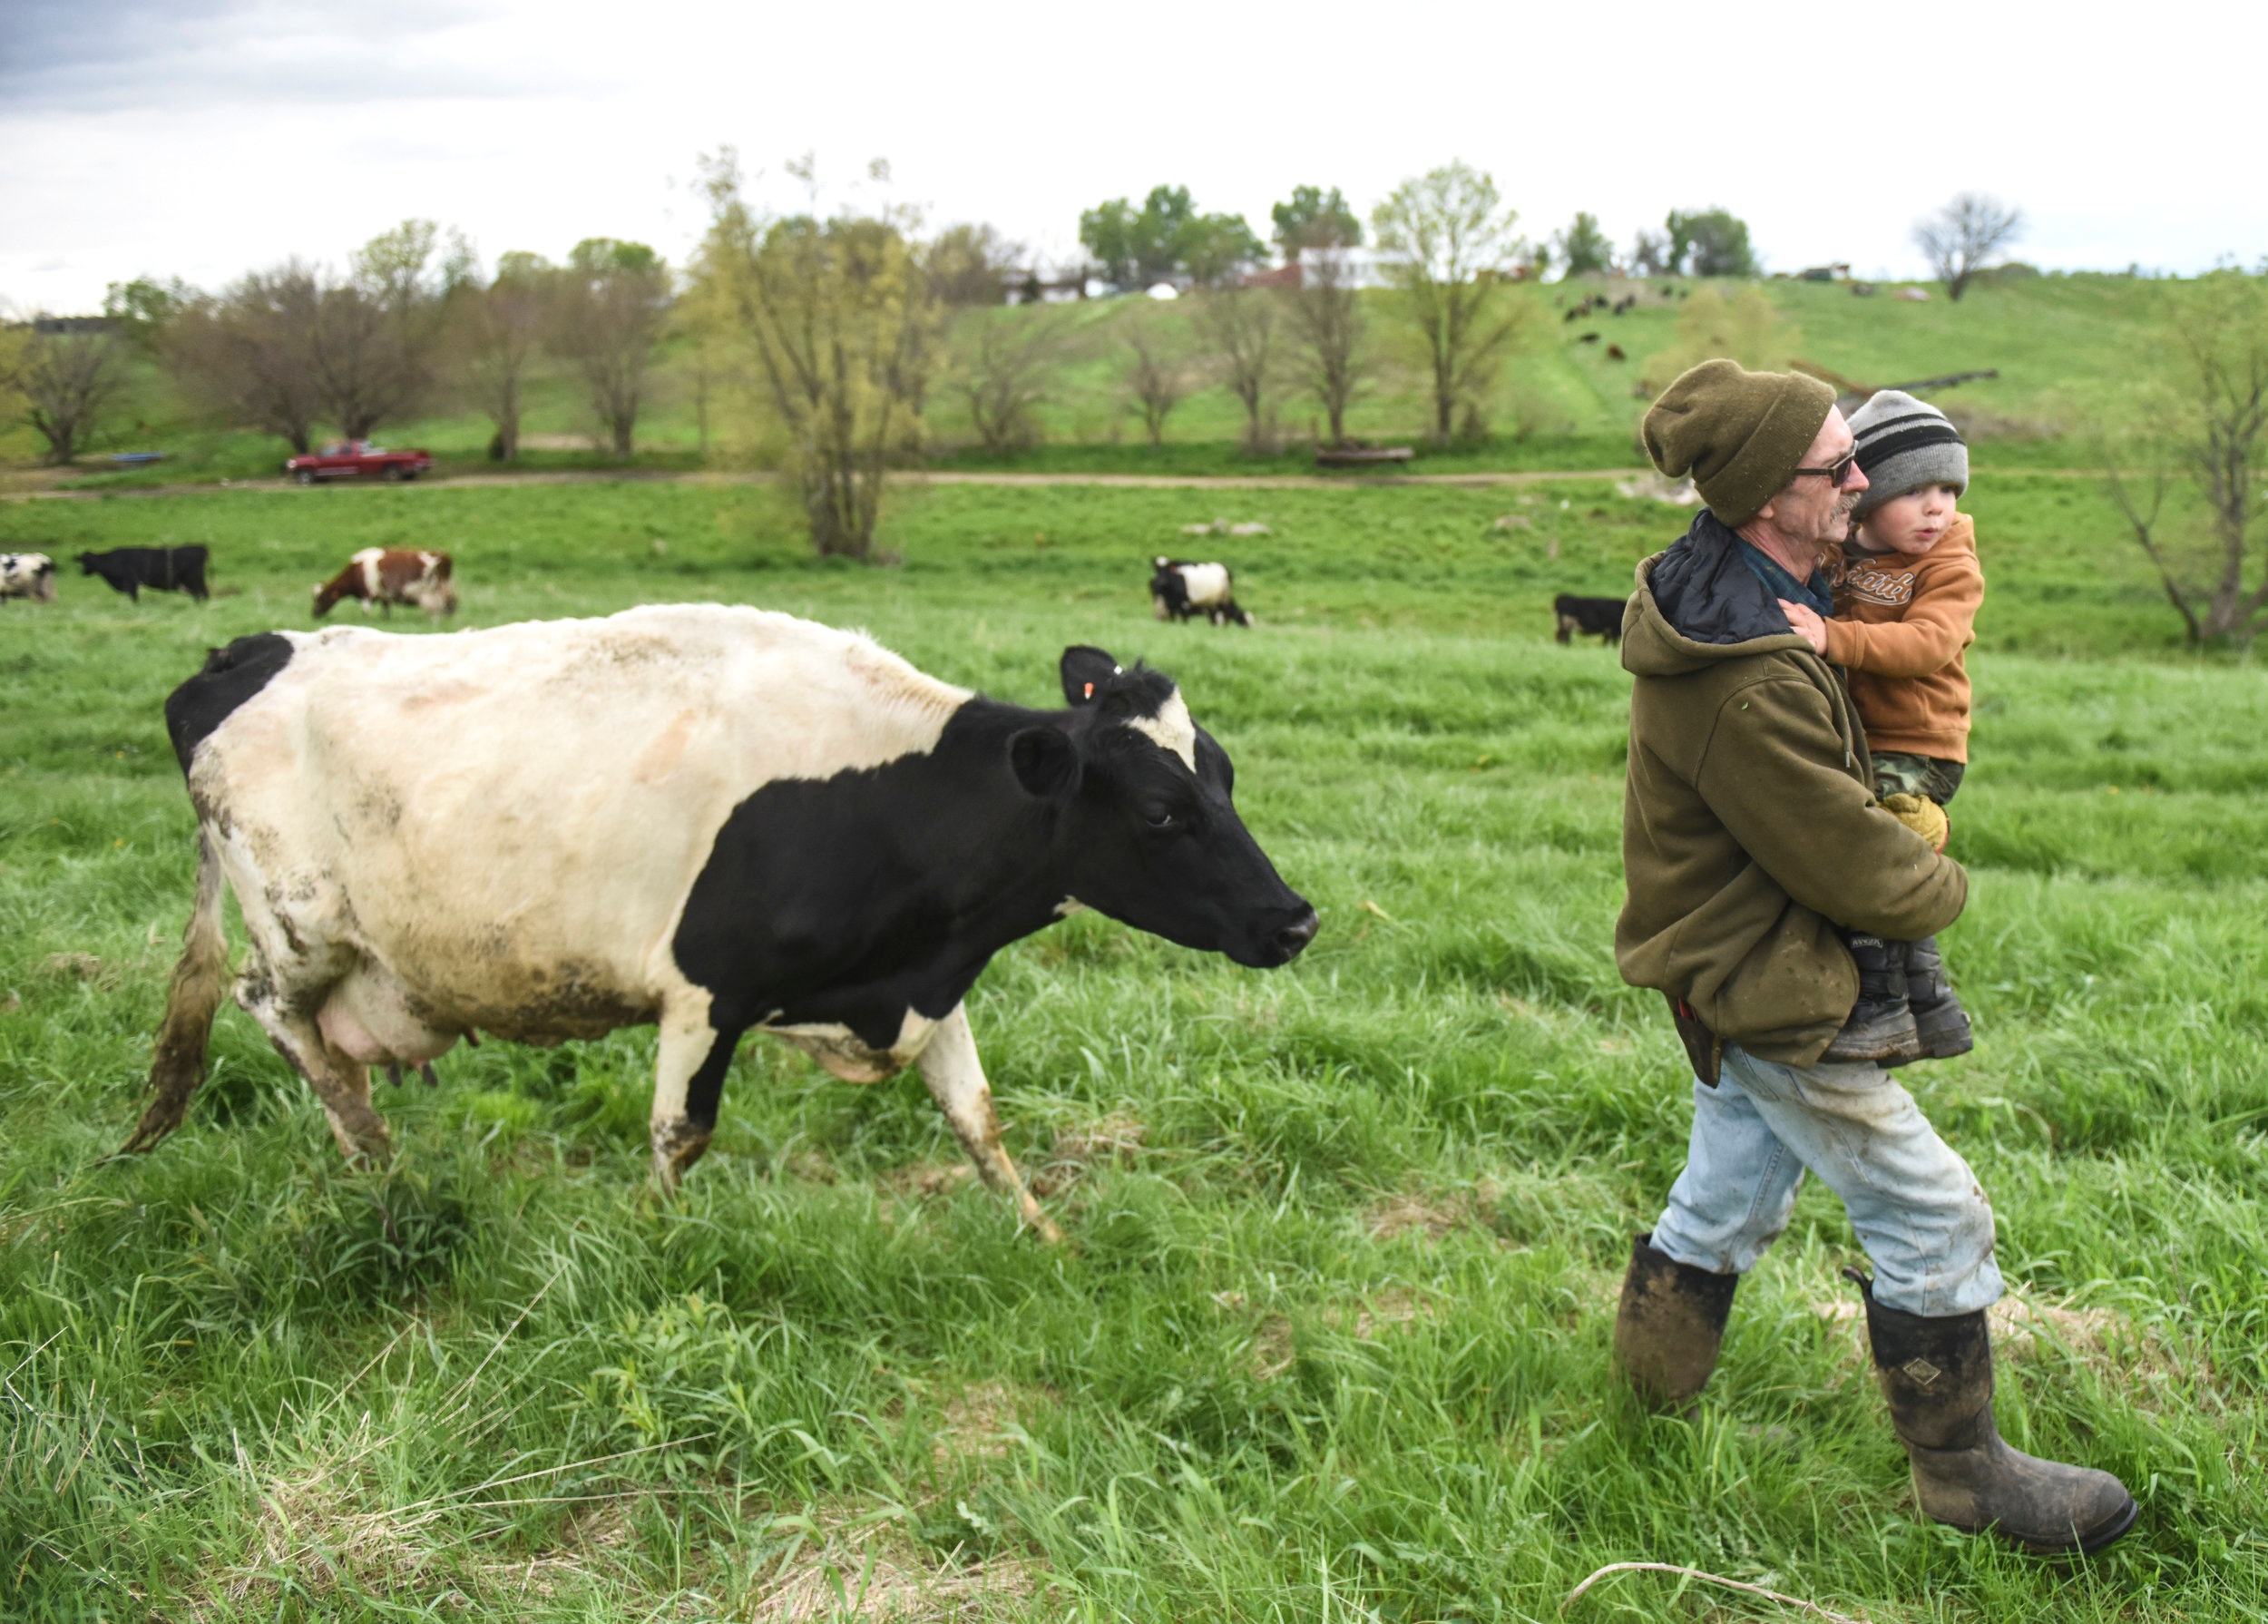  Bob DePauw and his grandson, Theo DePauw, herd a cow back toward the farm May 11 in Port Byron. Theo often tags along on chores with his grandfather, whether it's walking through fields or in the back of a tractor. 